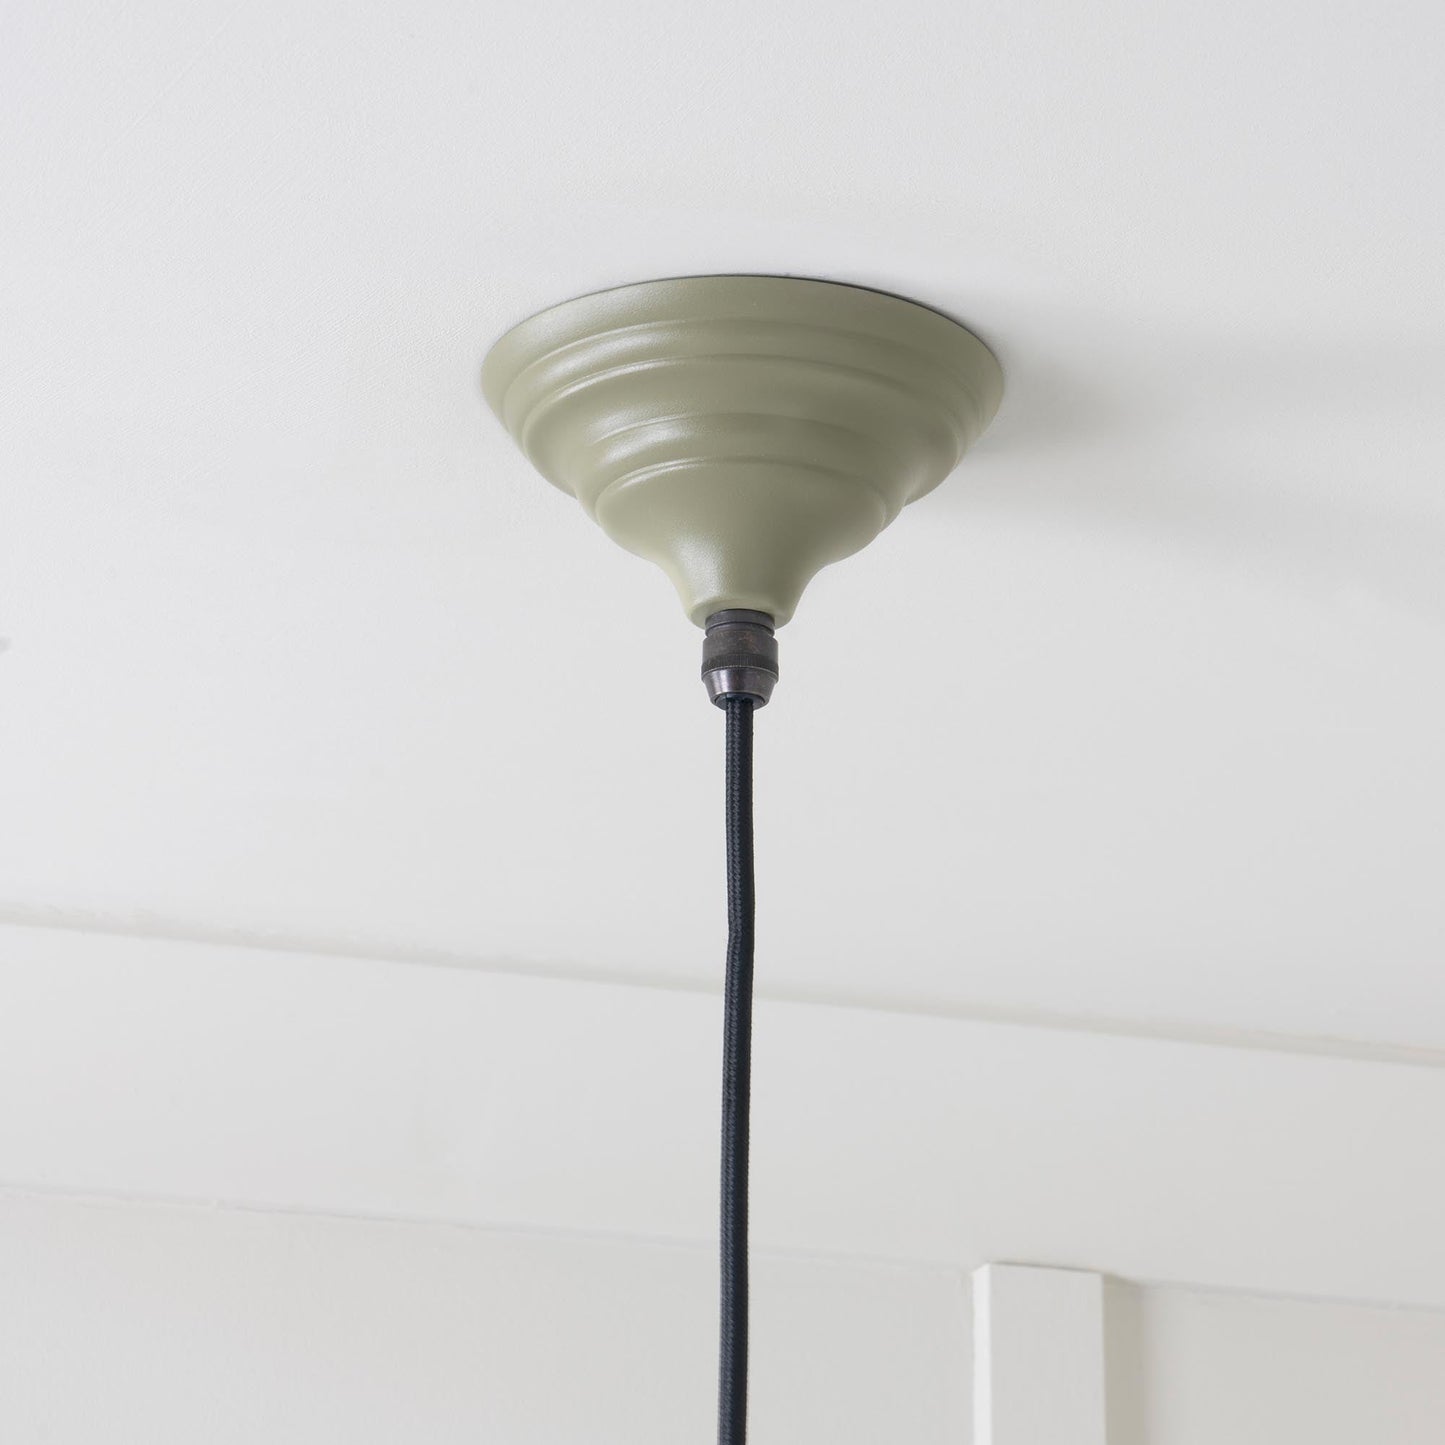 Hammered Brass Brindley Pendant Light Tump, close up view of fitting and cable.